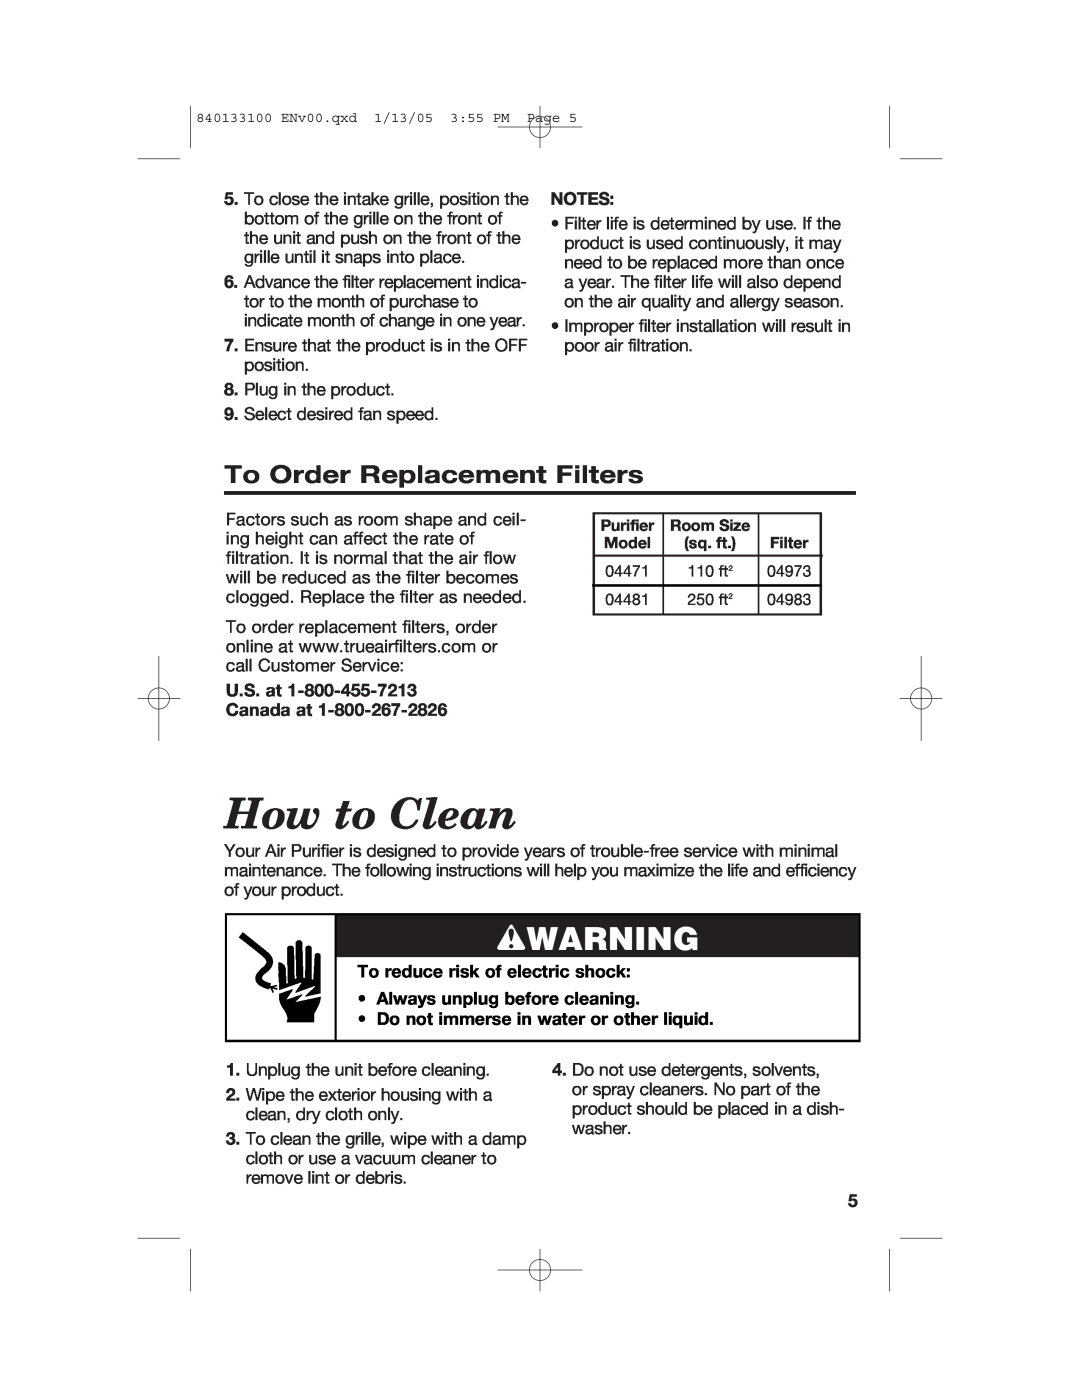 Hamilton Beach HEPA manual How to Clean, To Order Replacement Filters, U.S. at Canada at, To reduce risk of electric shock 